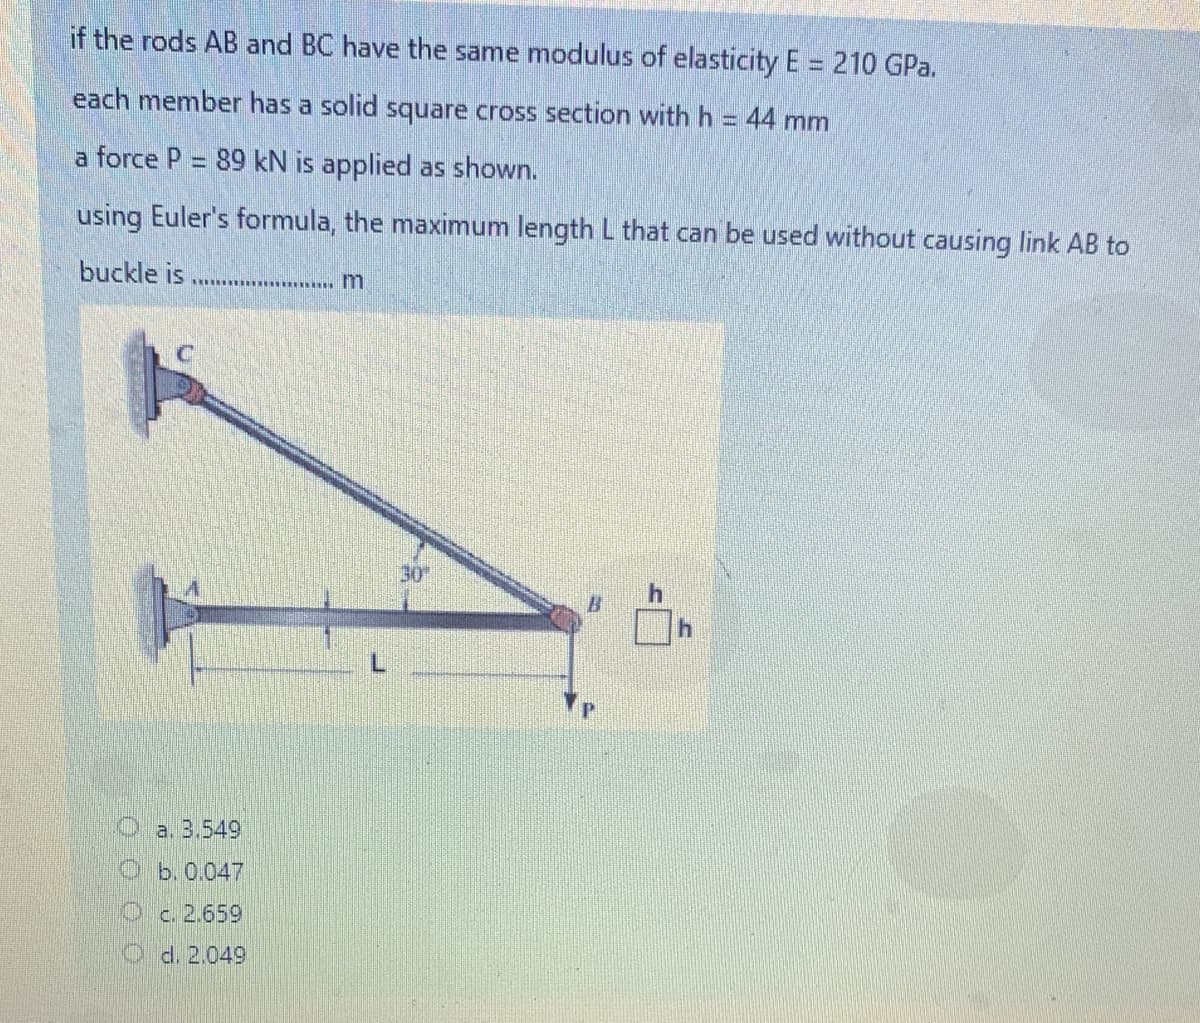 if the rods AB and BC have the same modulus of elasticity E = 210 GPa.
each member has a solid square cross section with h = 44 mm
a force P = 89 kN is applied as shown.
using Euler's formula, the maximum length L that can be used without causing link AB to
buckle is
30
B.
Oa. 3.549
Ob.0.047
Oc. 2.659
d. 2,049
